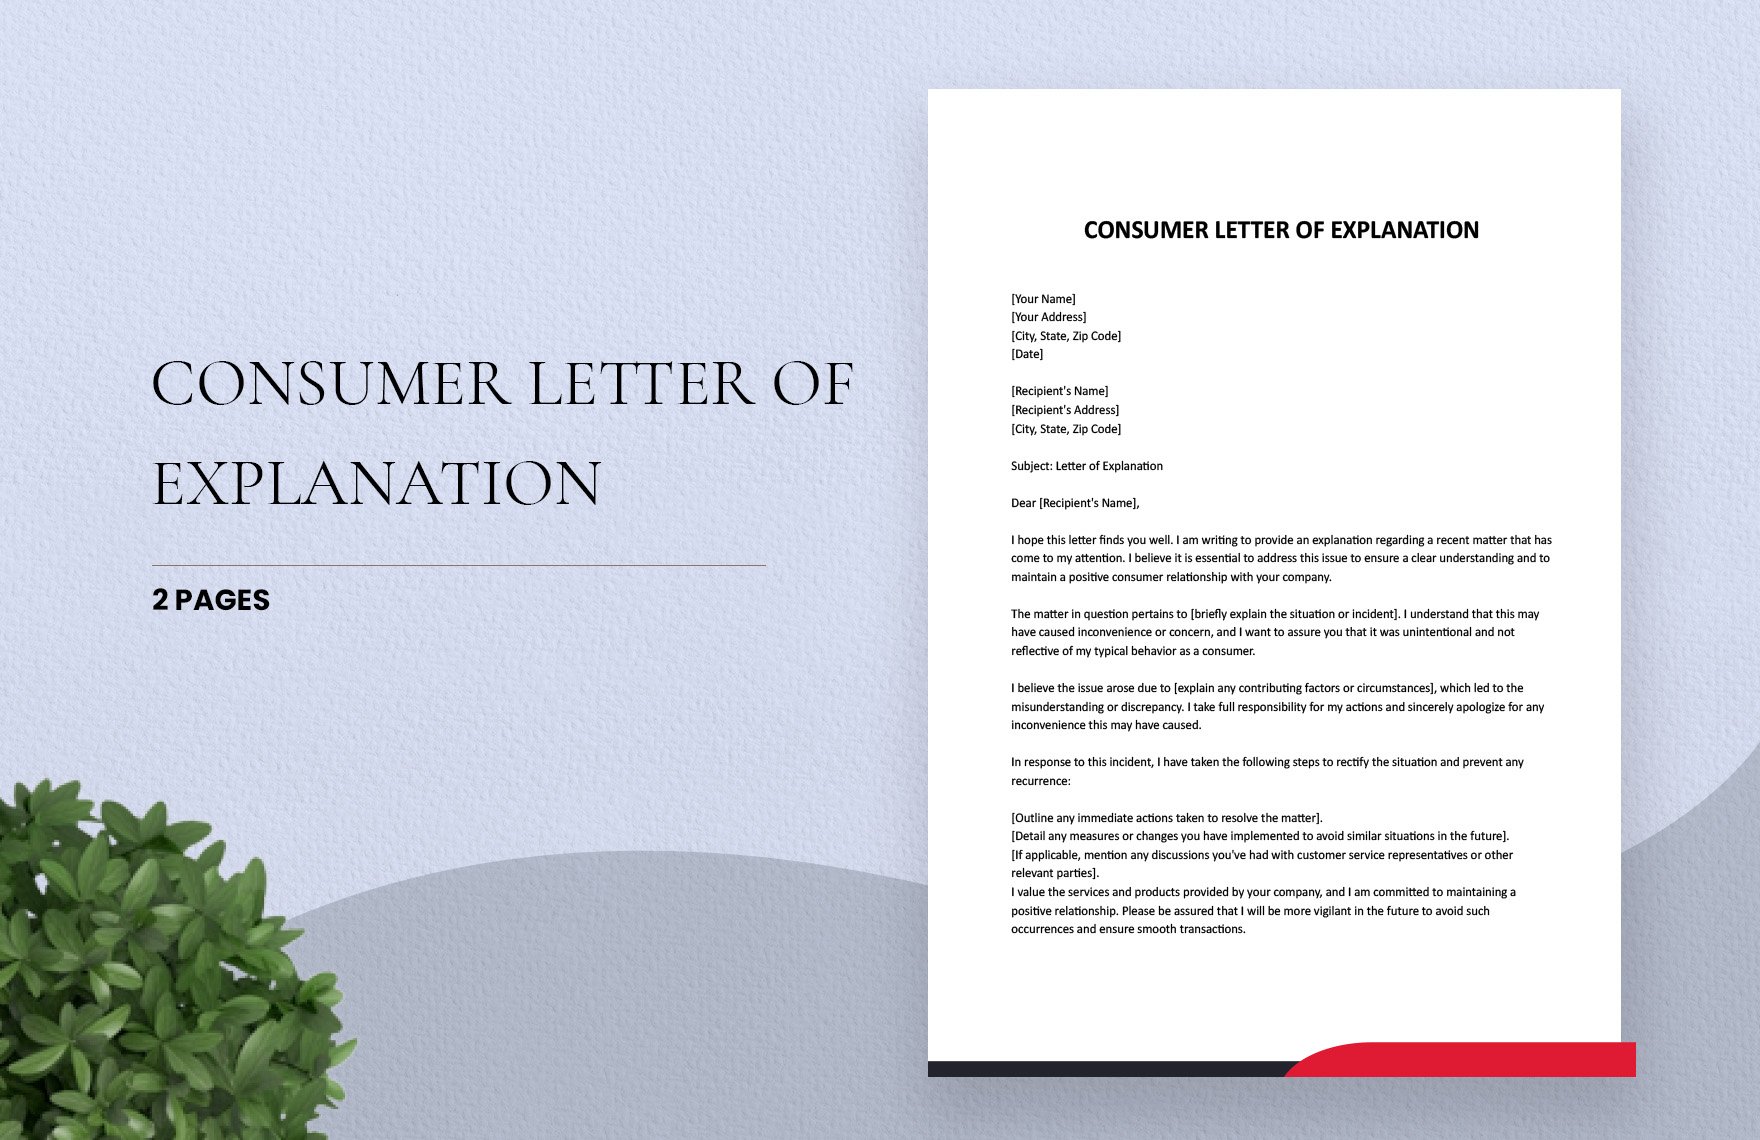 Consumer Letter Of Explanation in Word, Google Docs, Apple Pages